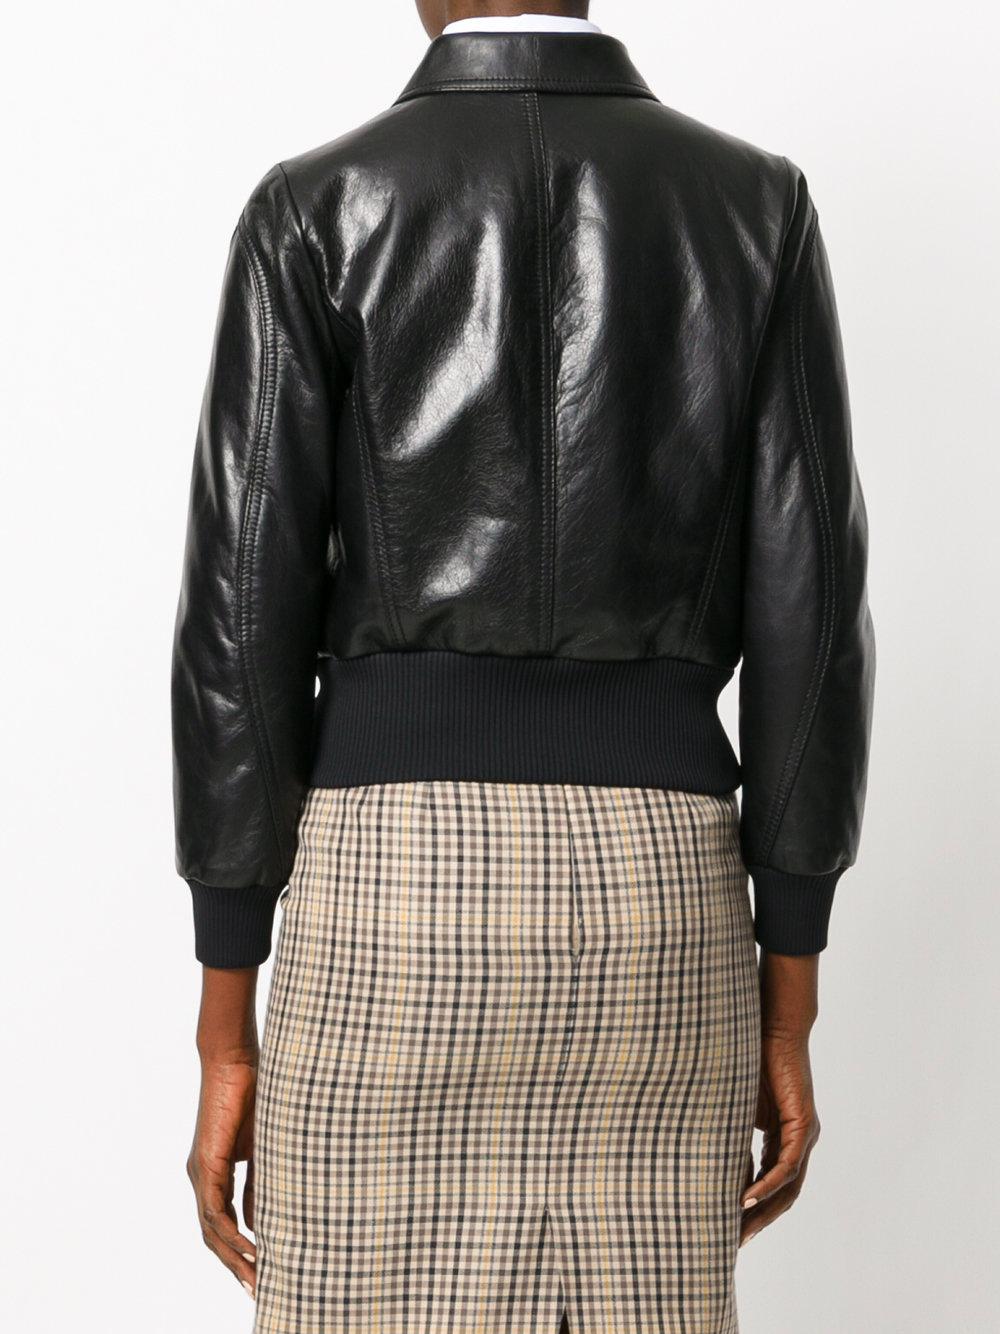 Prada Leather Cropped Bomber Jacket in Black - Lyst